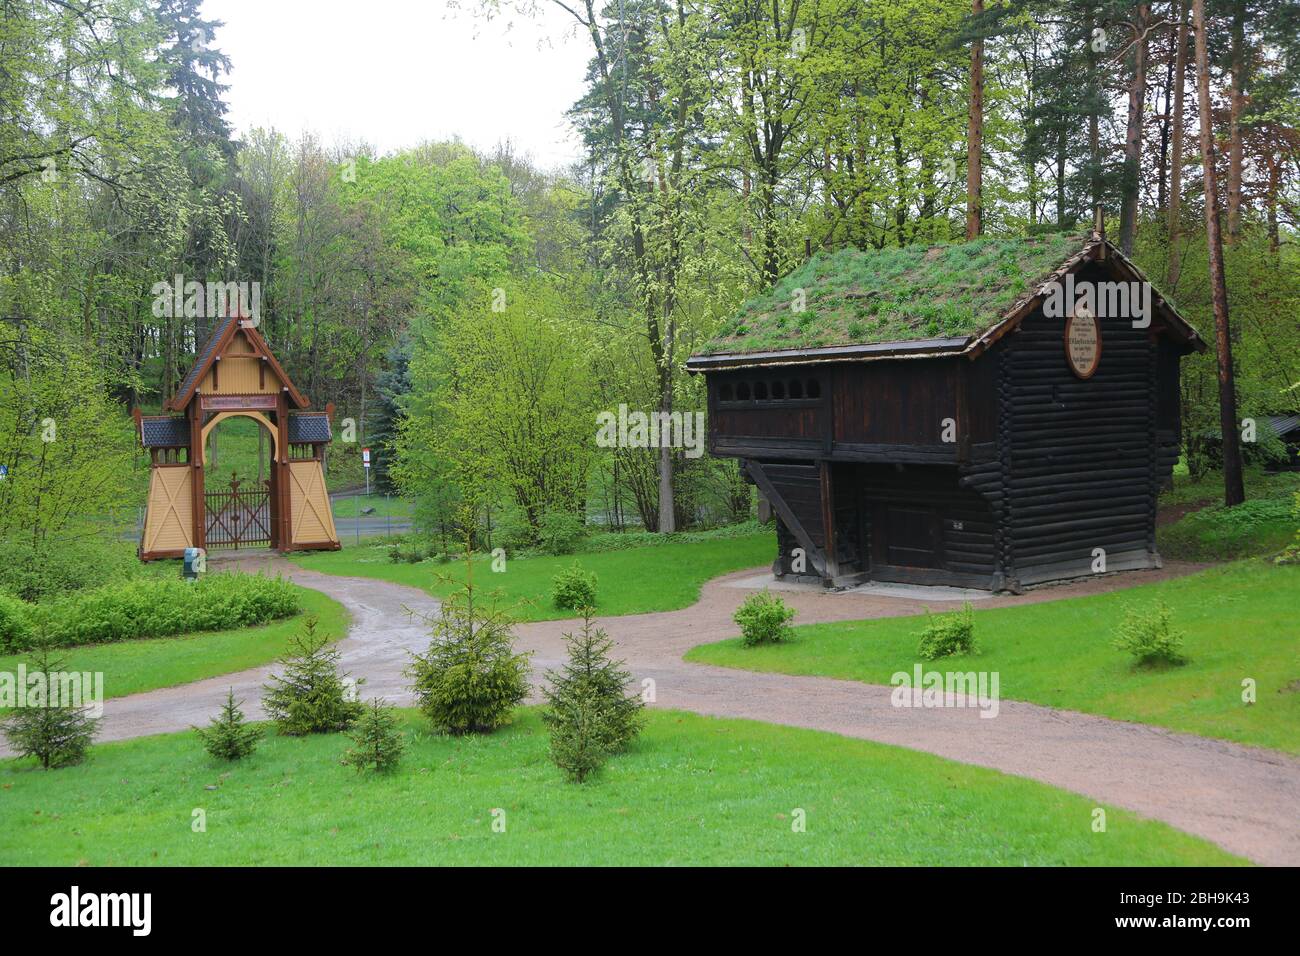 Old wooden building Open Air Museum Norway Stock Photo